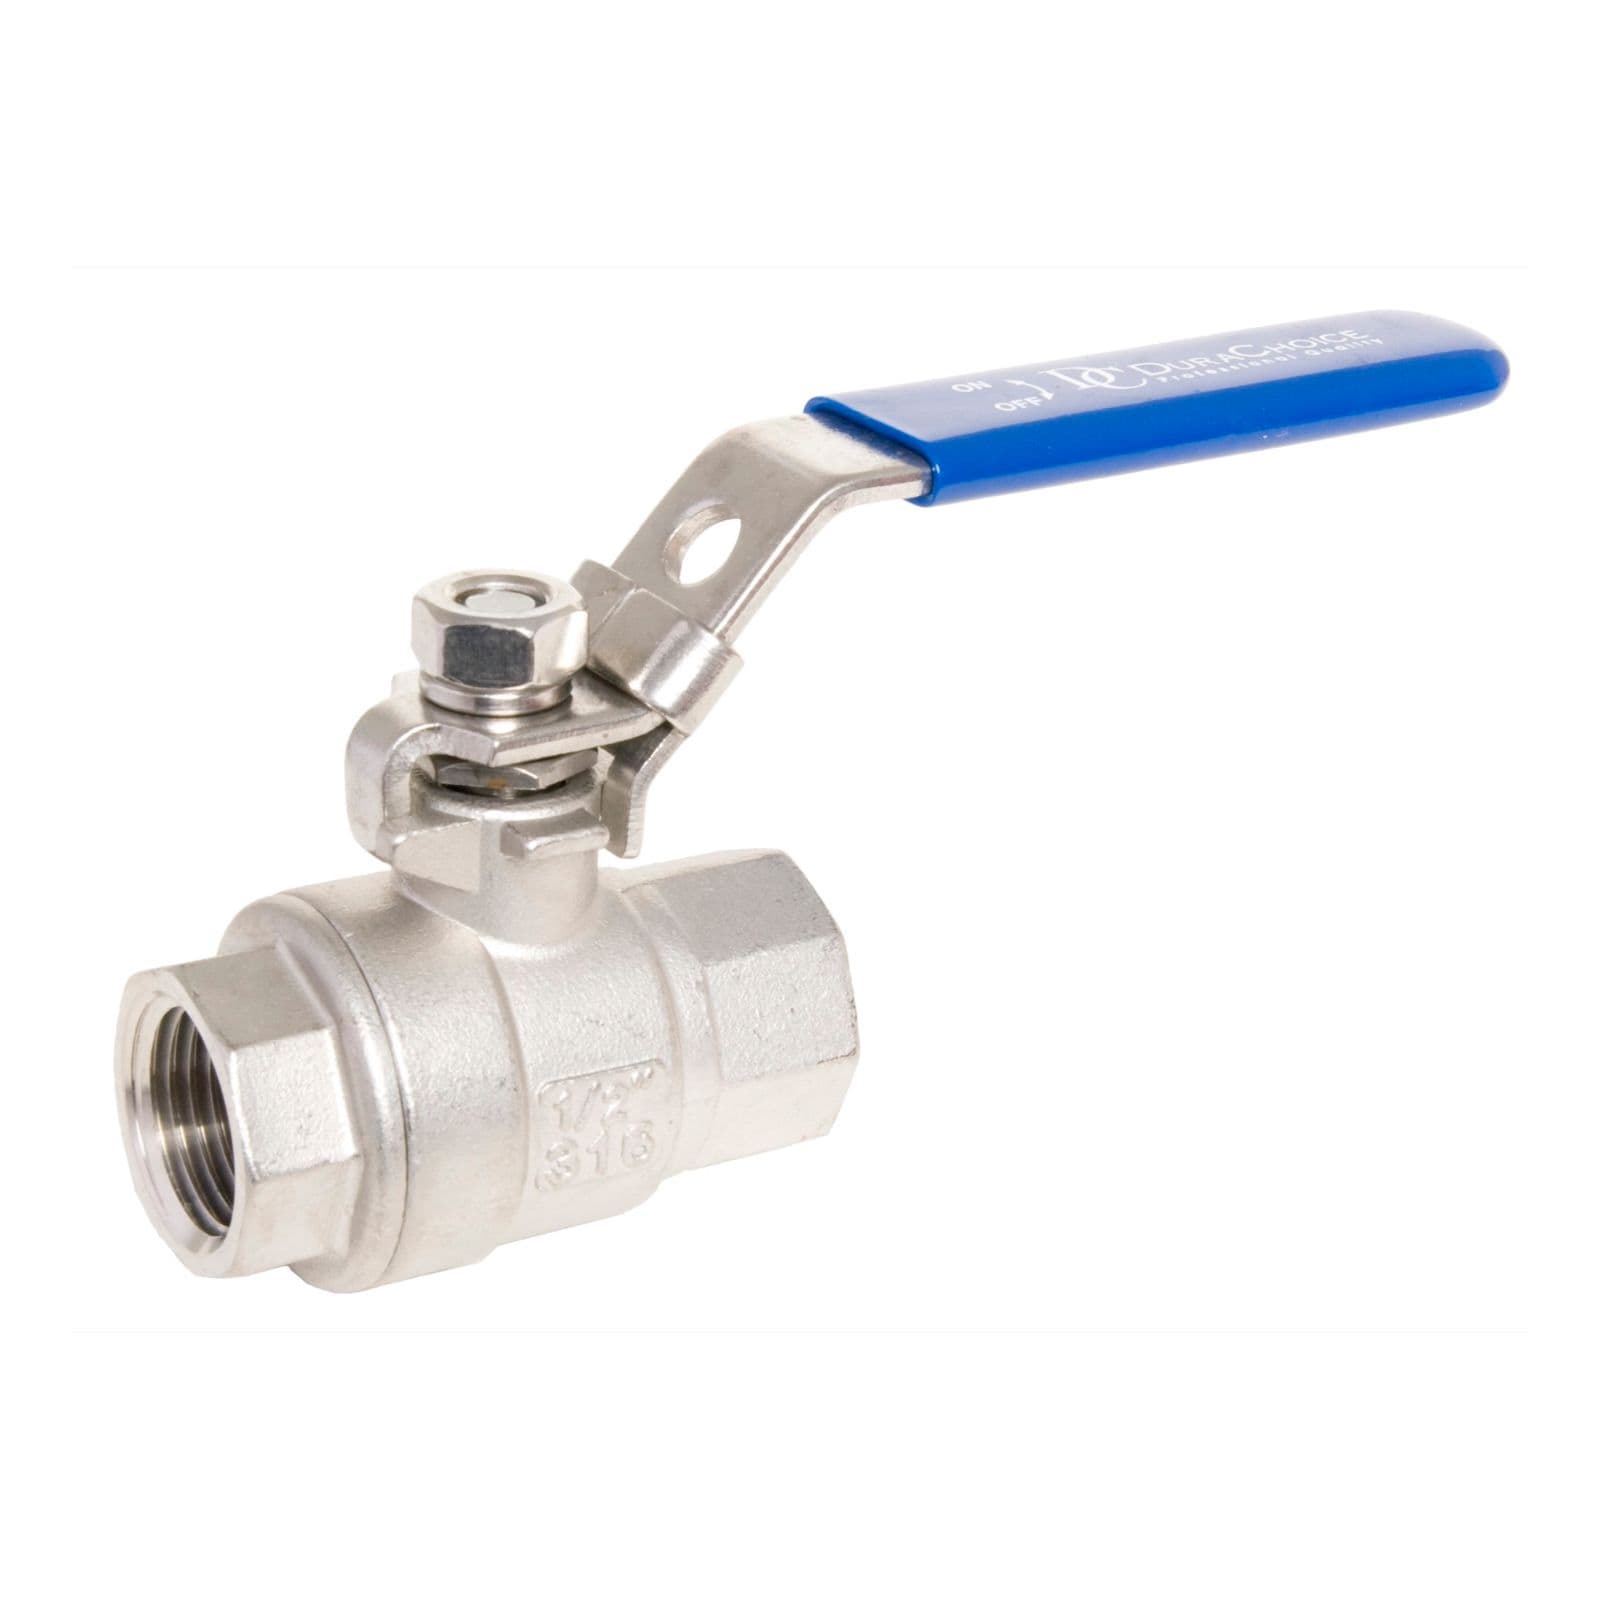 1/2" 1/2 Inch 1pc Pipe Ball Valve Female Threaded Stainless Steel SUS 304 NPT